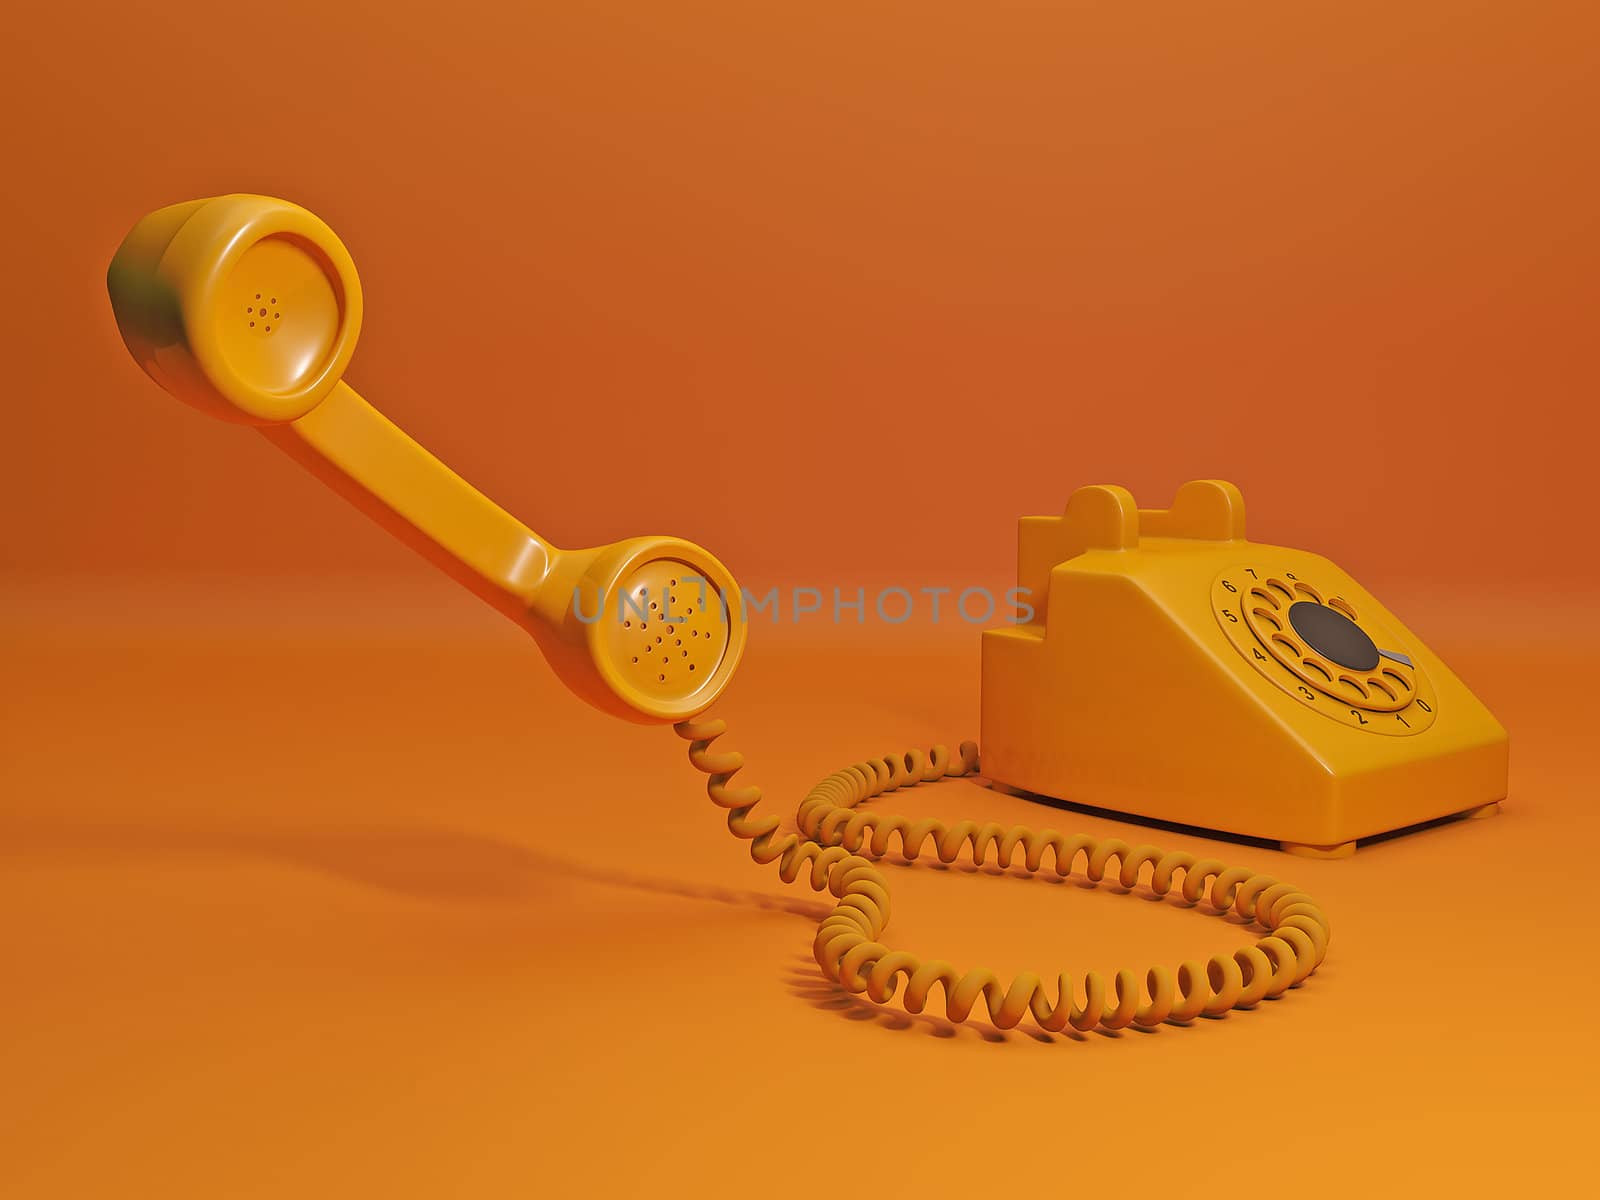 Call to order a taxi. Orange phone and the handset is close to the camera